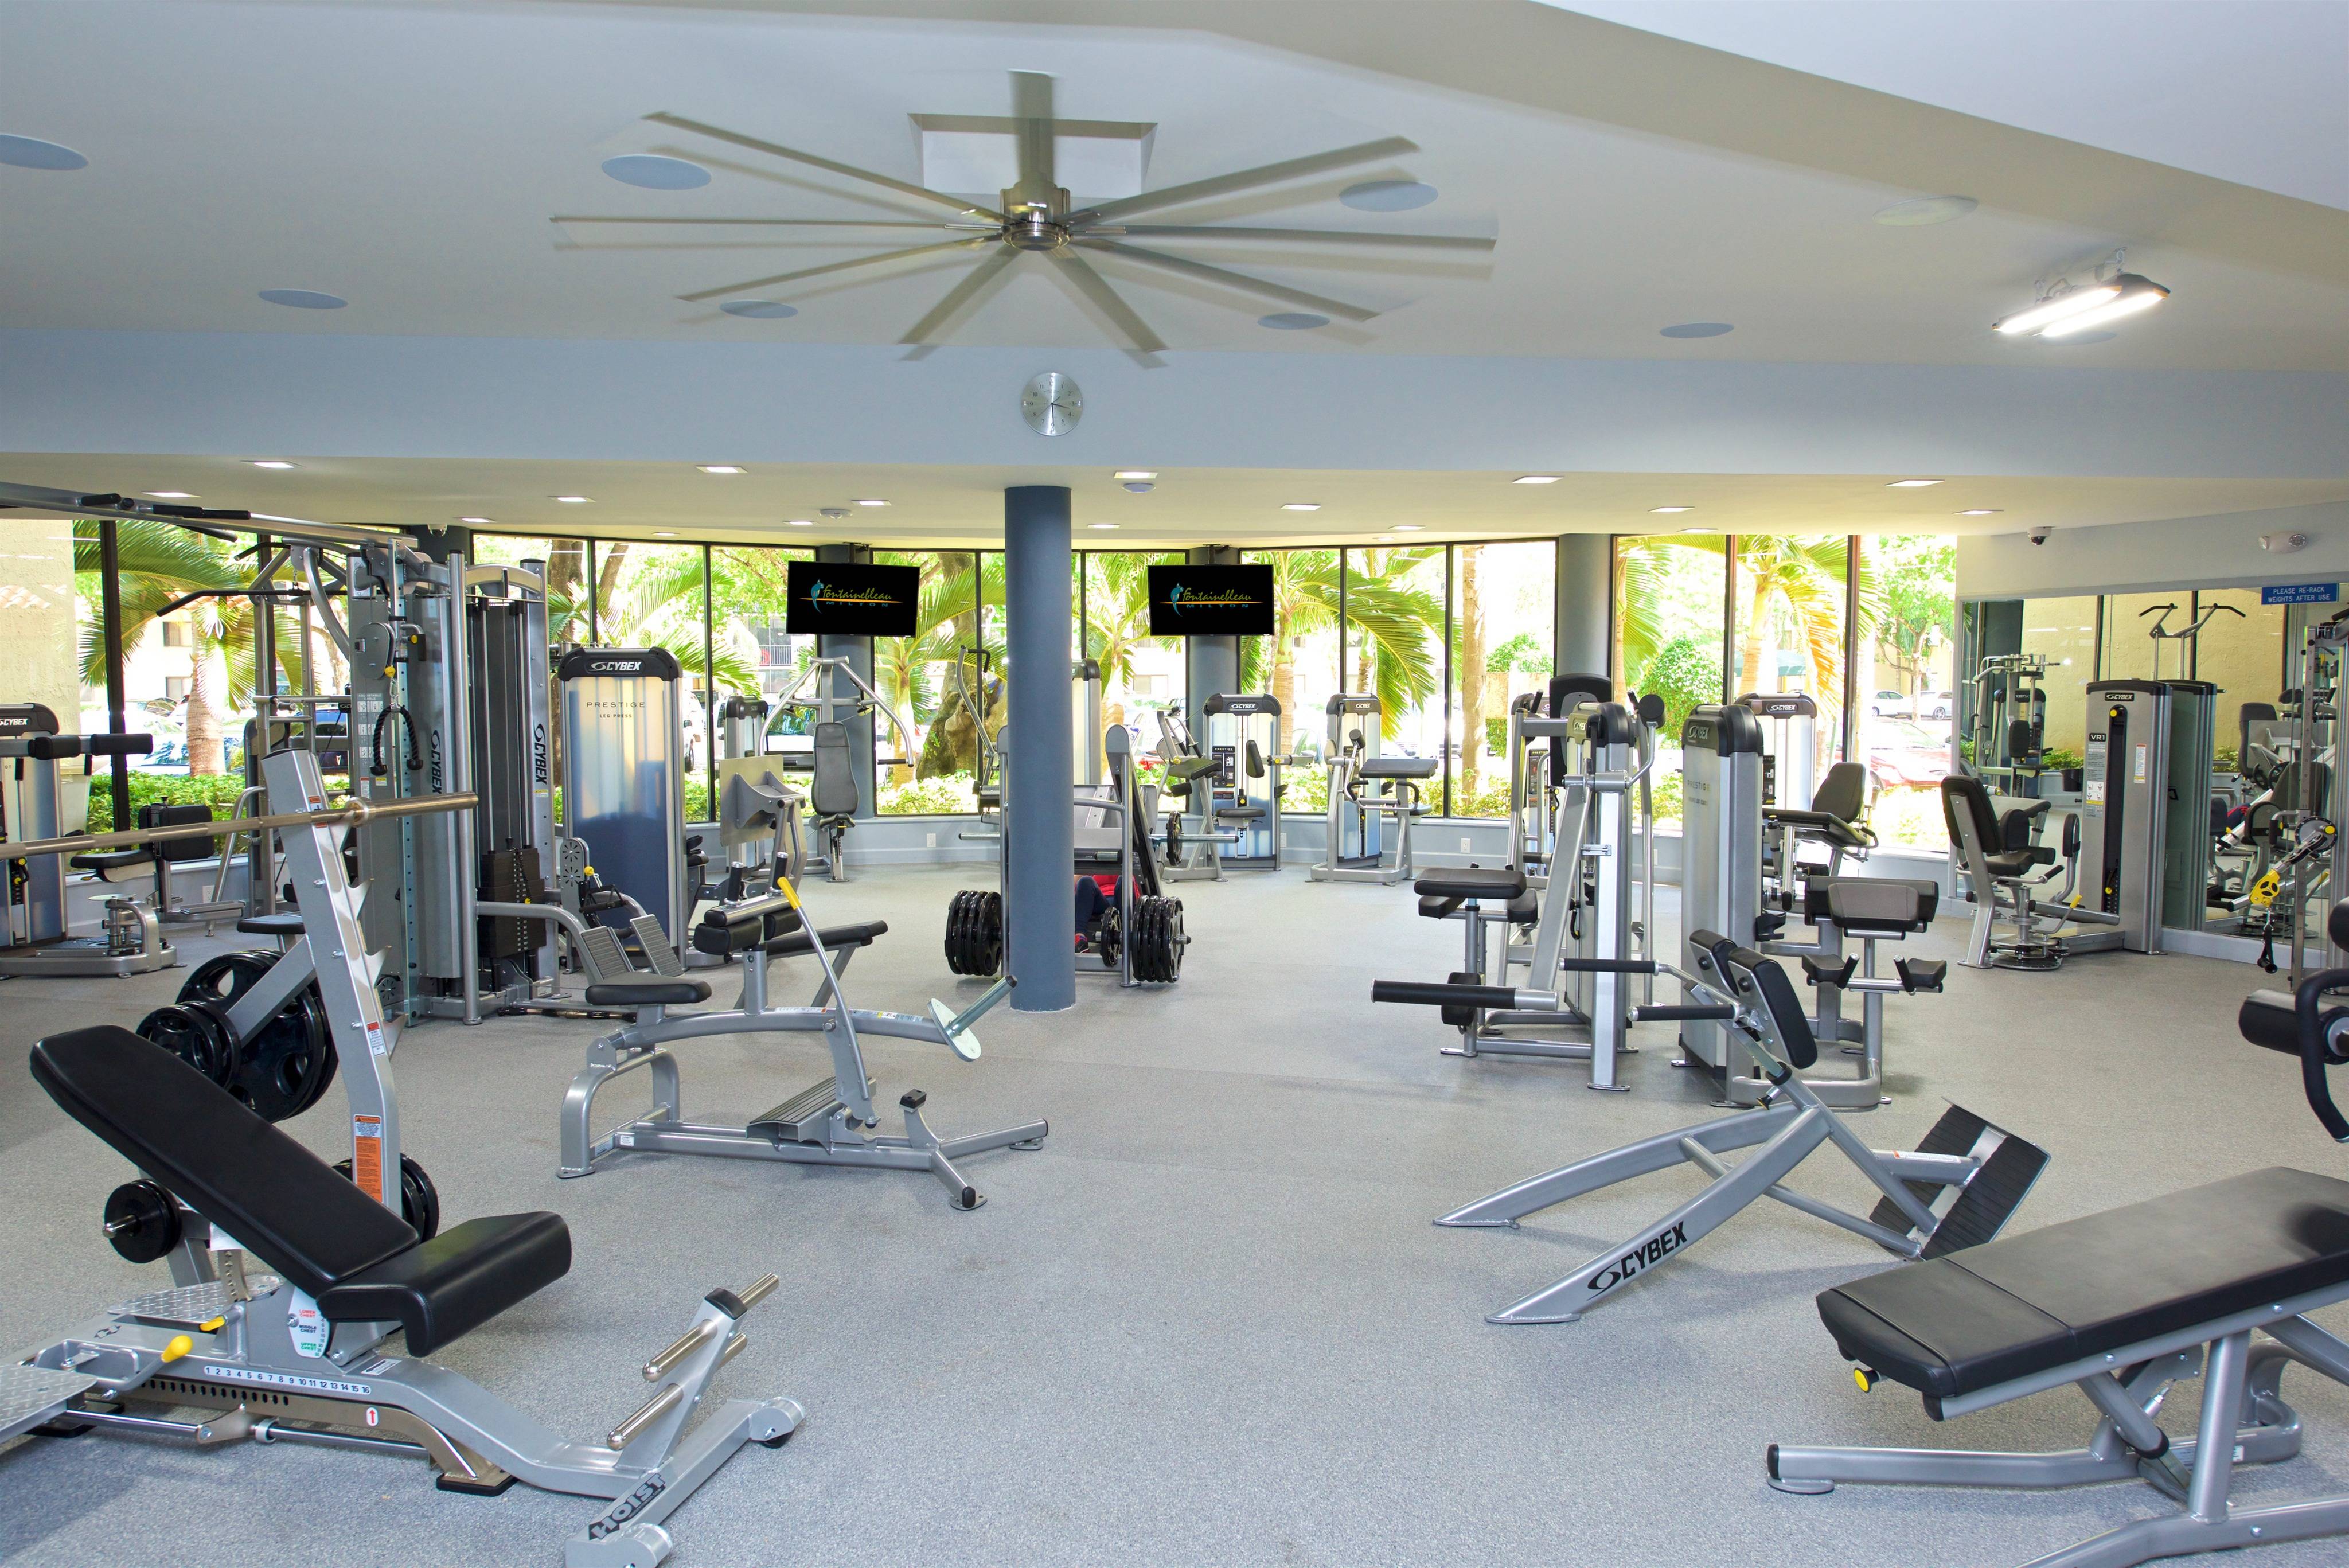 Brand New 2,500 Sq Ft, Fully Equipped Fitness Center with 24-Hour Cardio Room